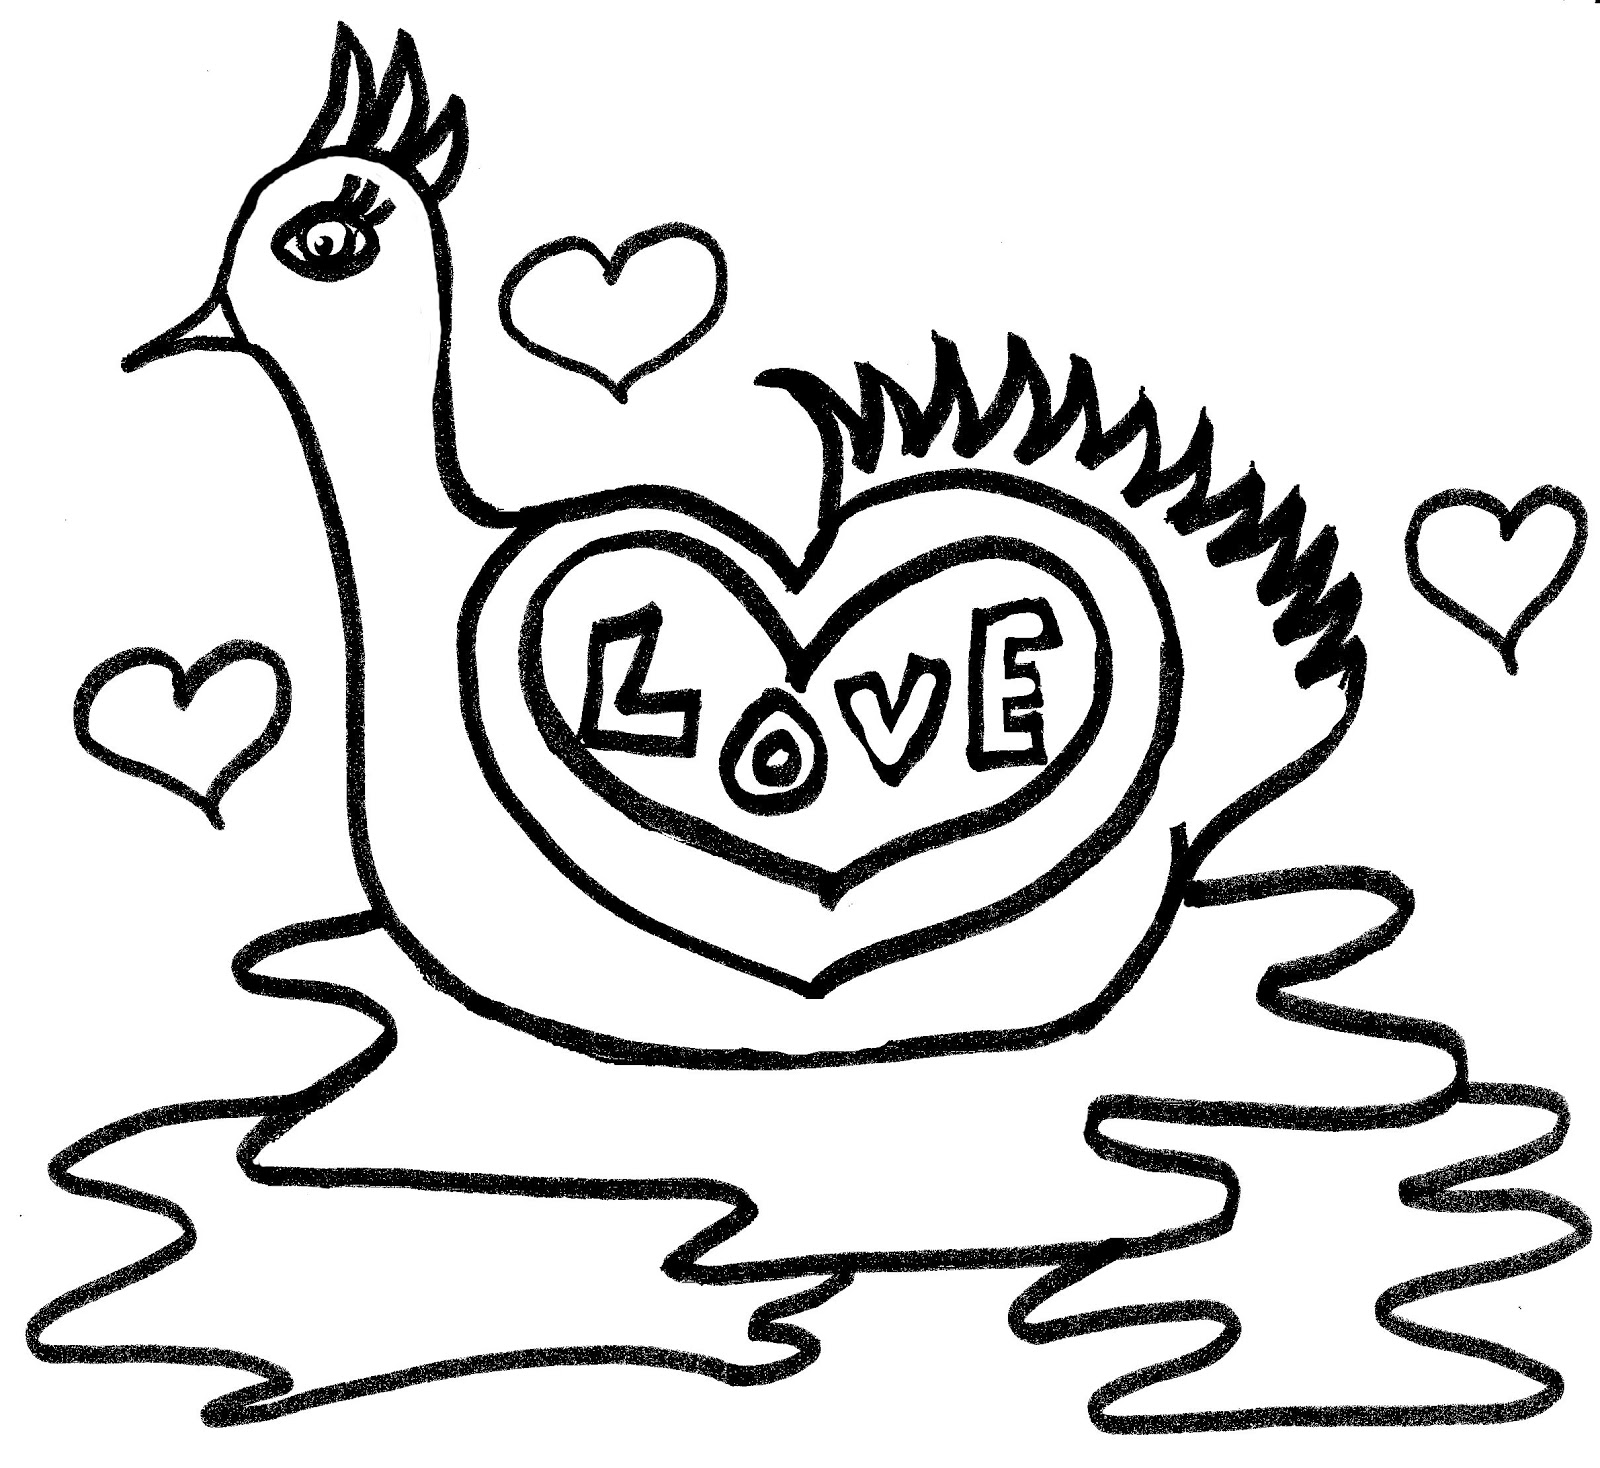 Drawing Designs Of Hearts - ClipArt Best